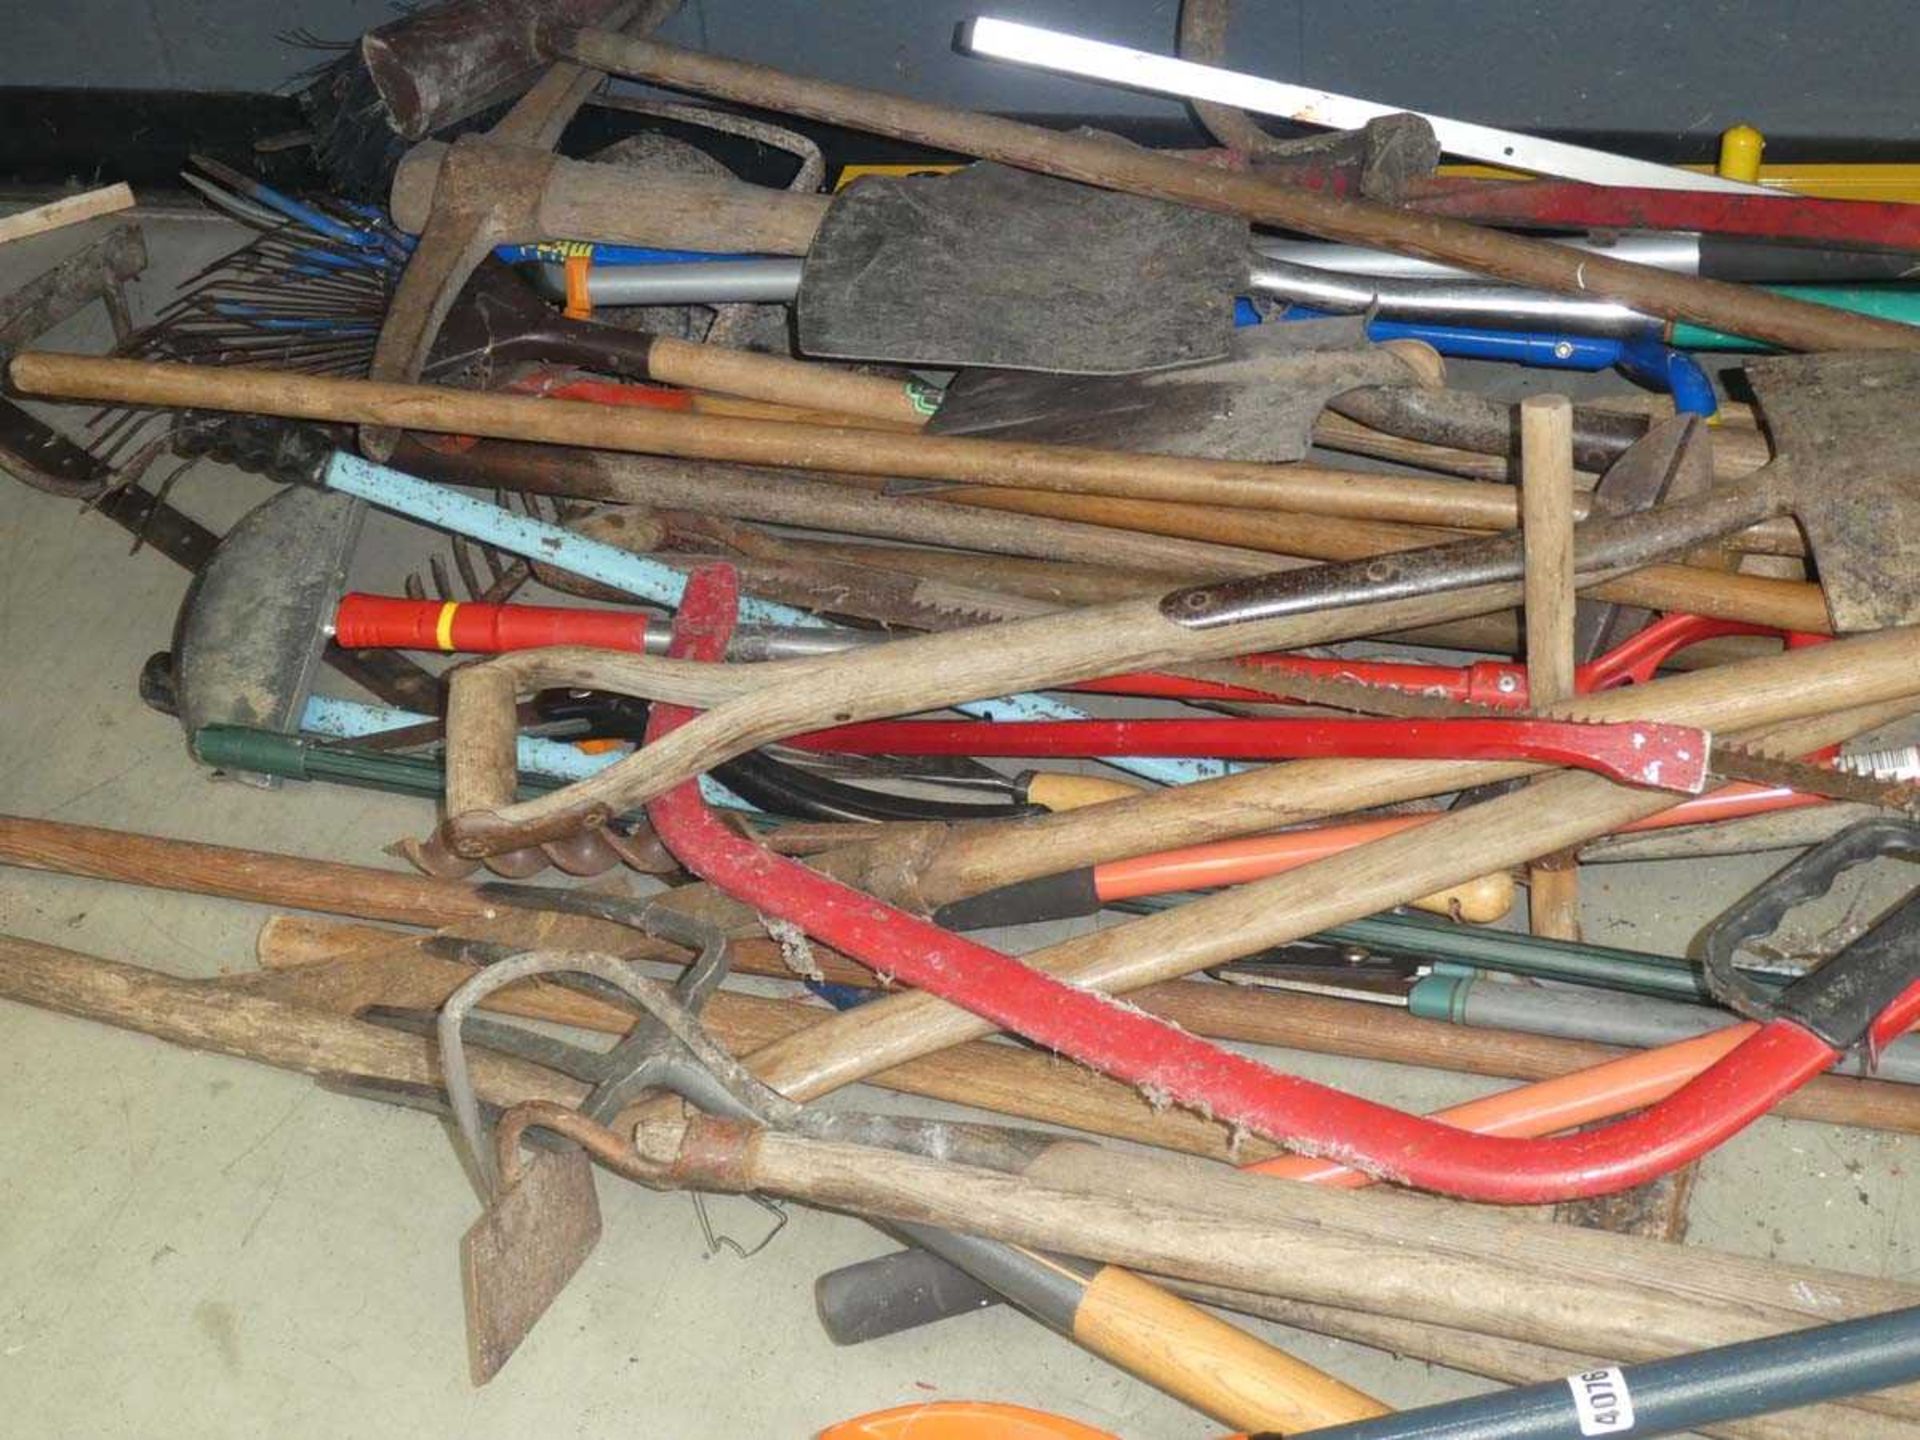 3/4 underbay of garden tools including shovels, forks, saws, loppers, rakes, sawhorses etc. - Image 2 of 3